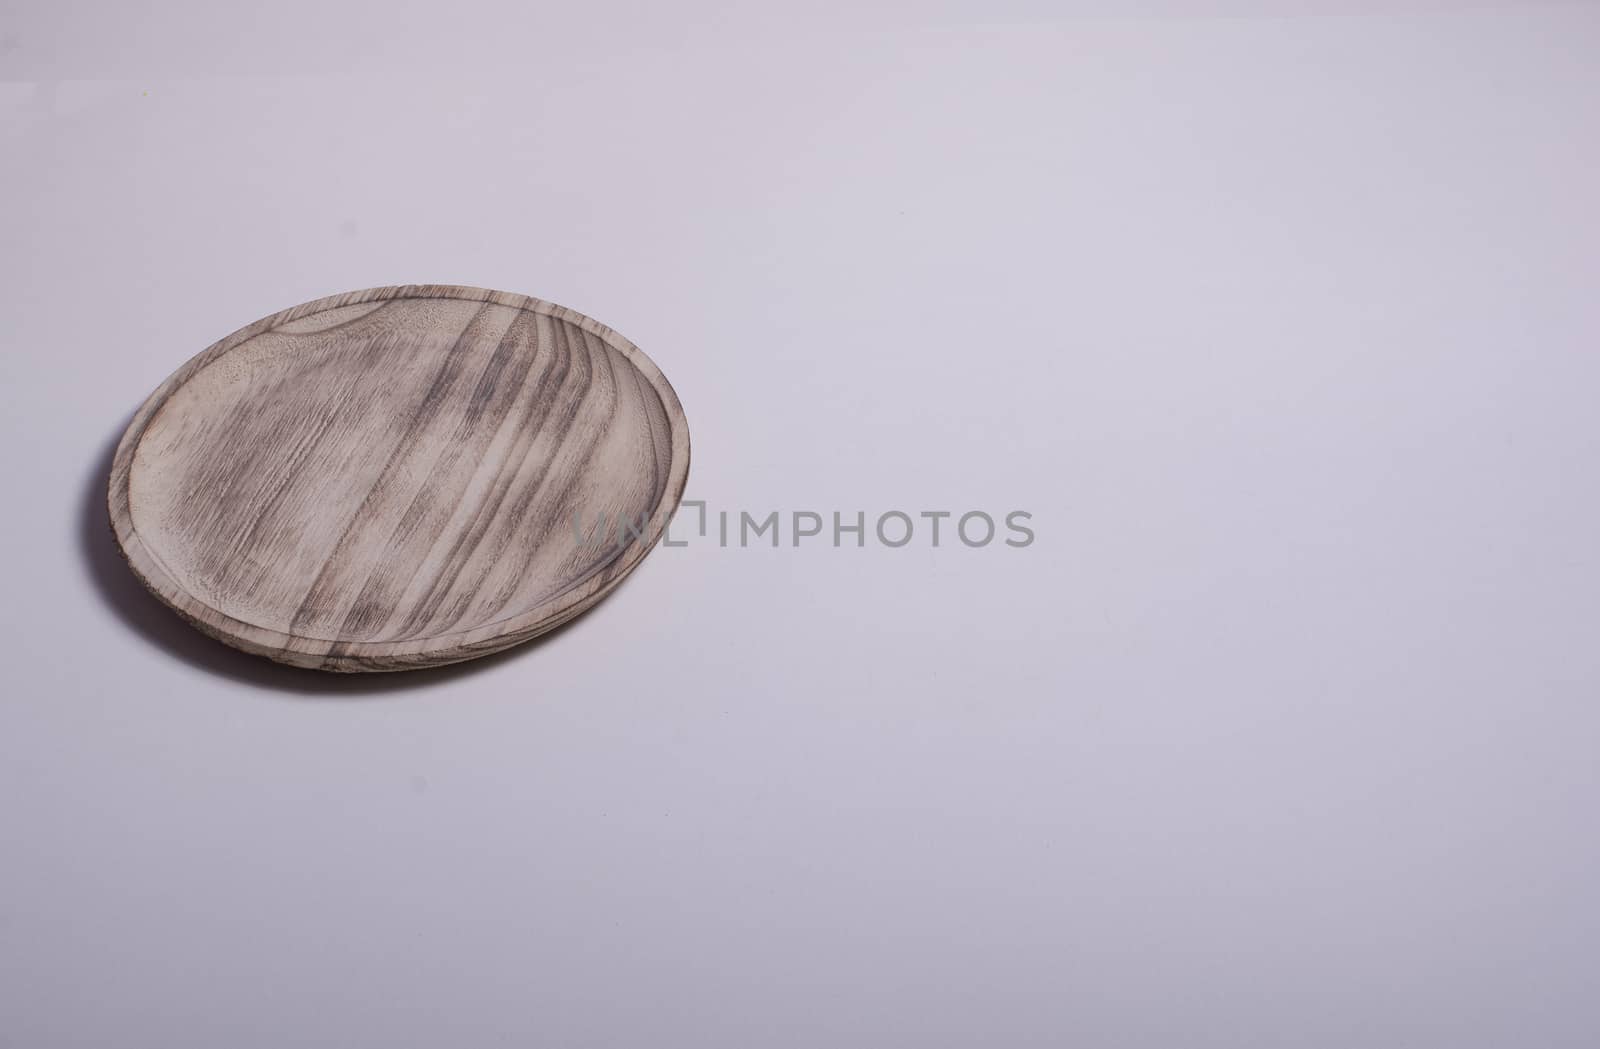 Old wooden plate on white background by raul_ruiz